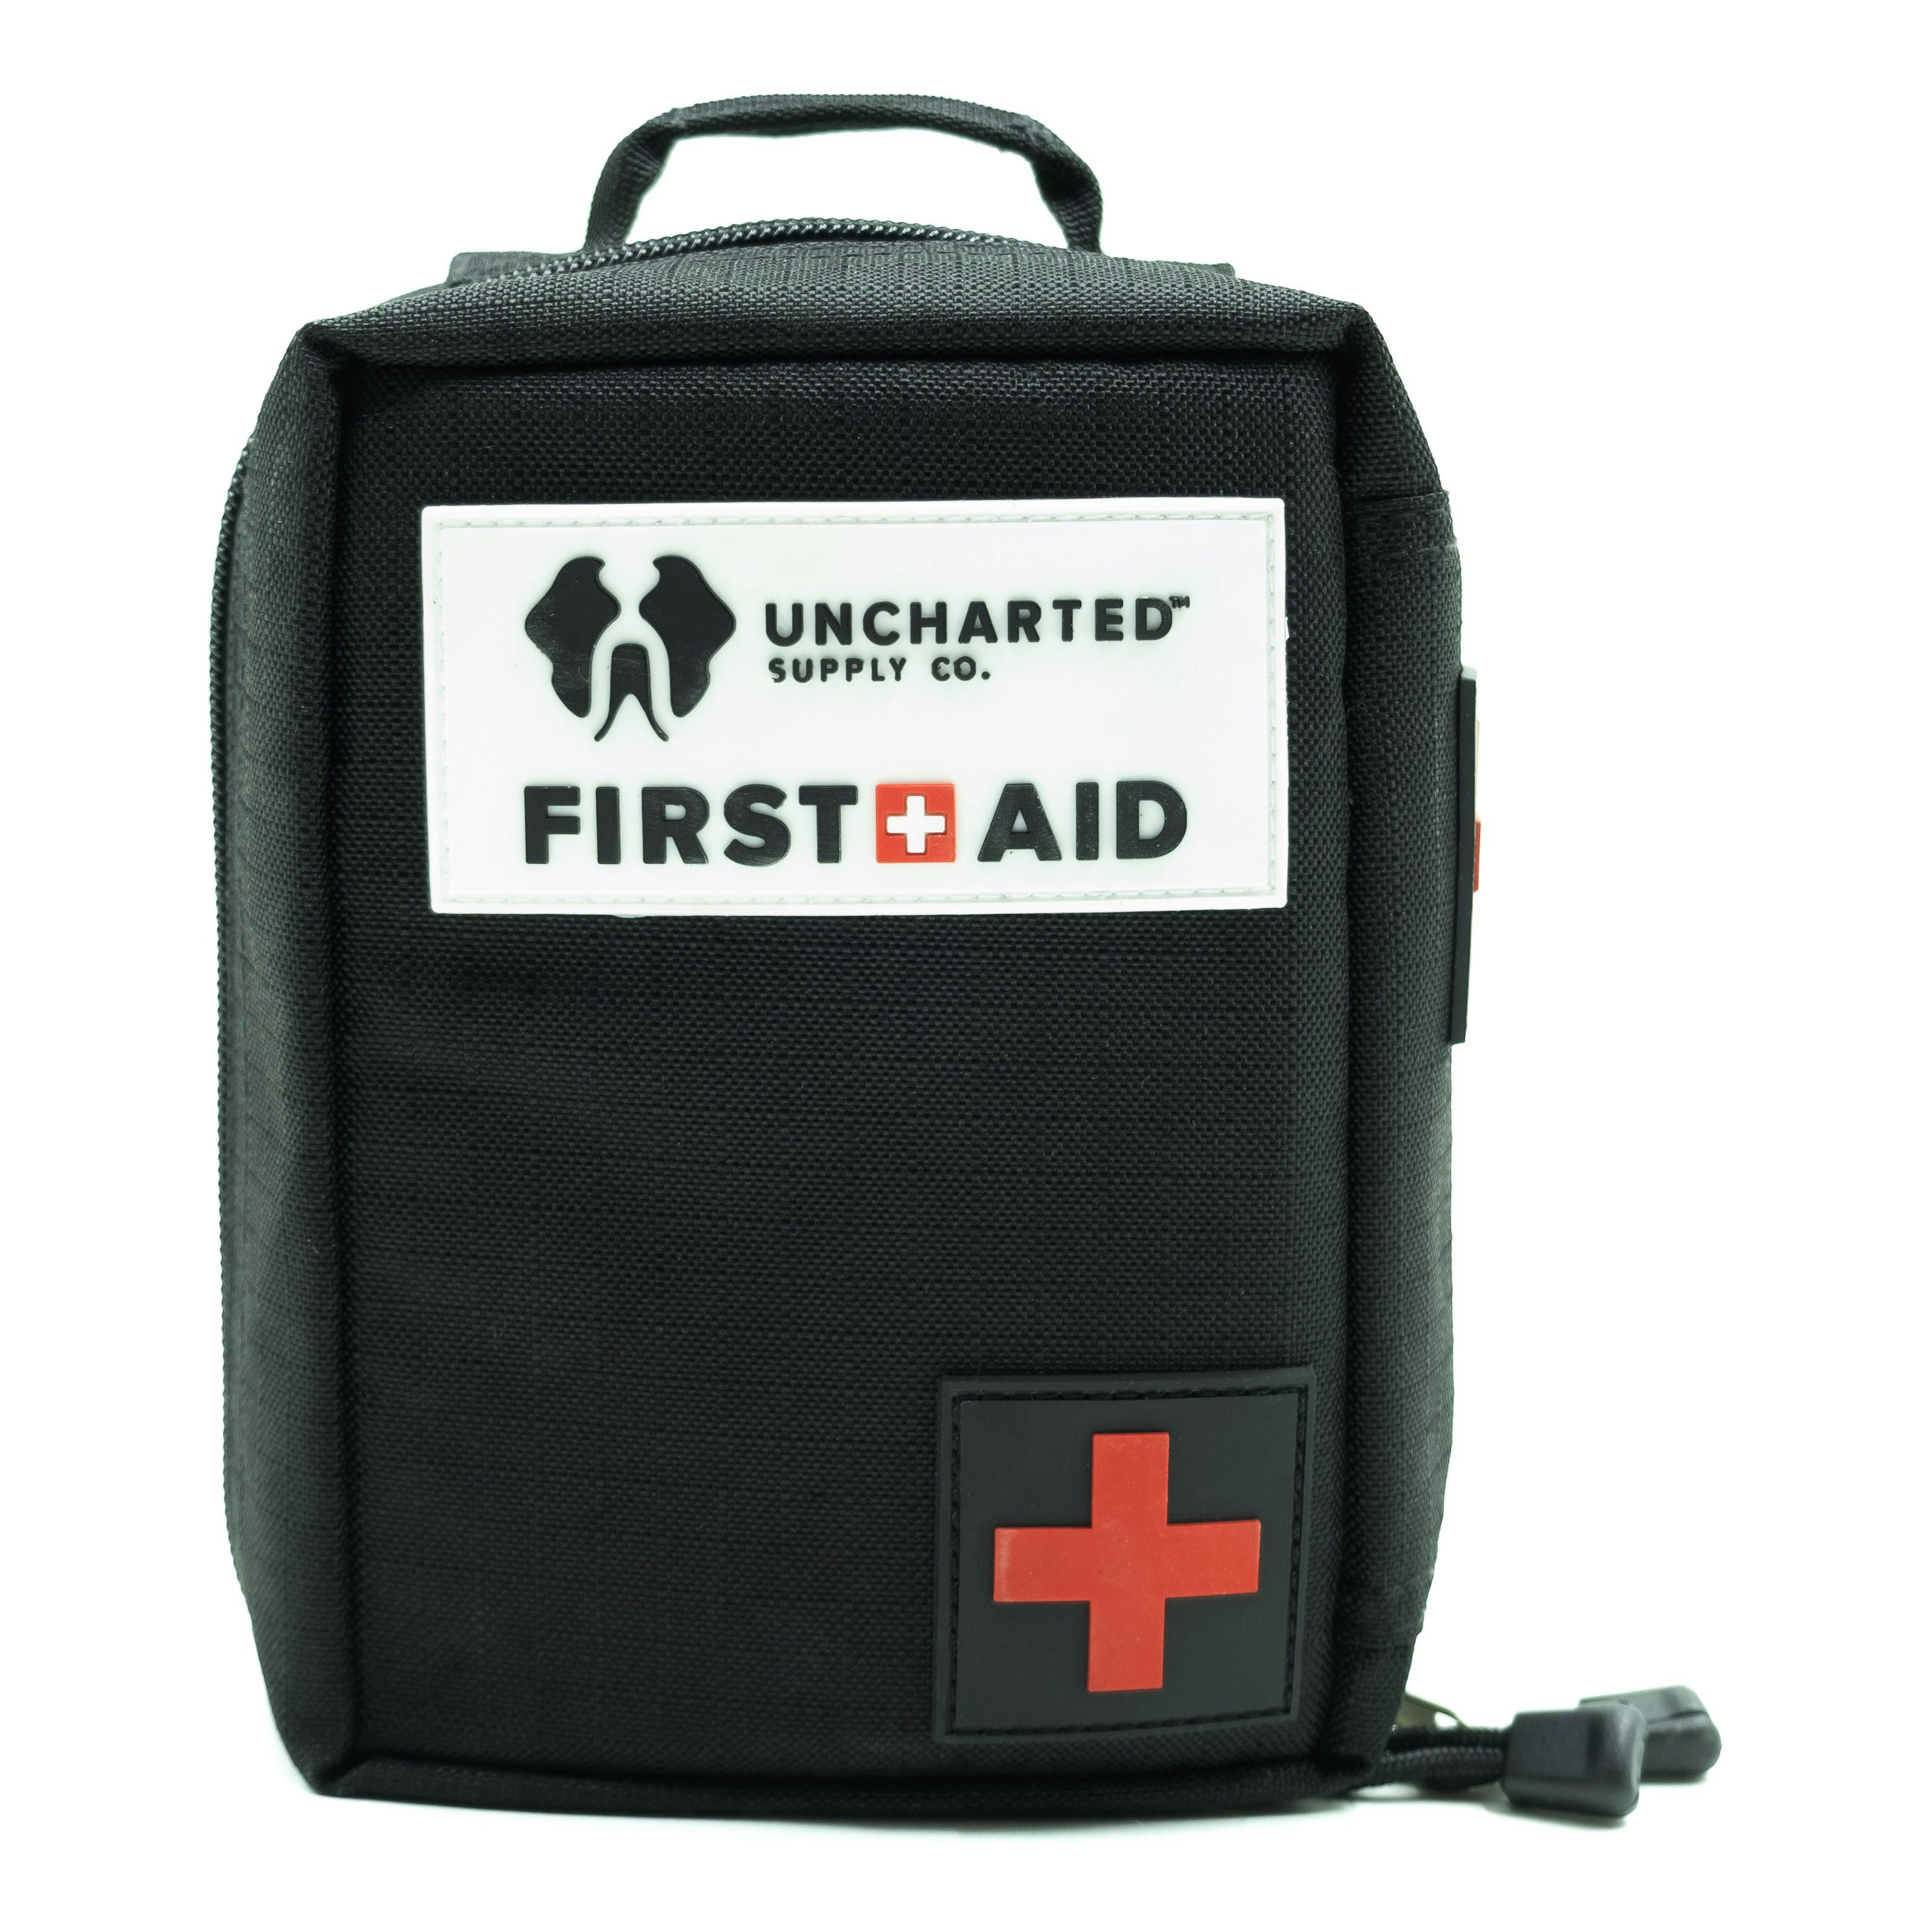 First Aid Pro